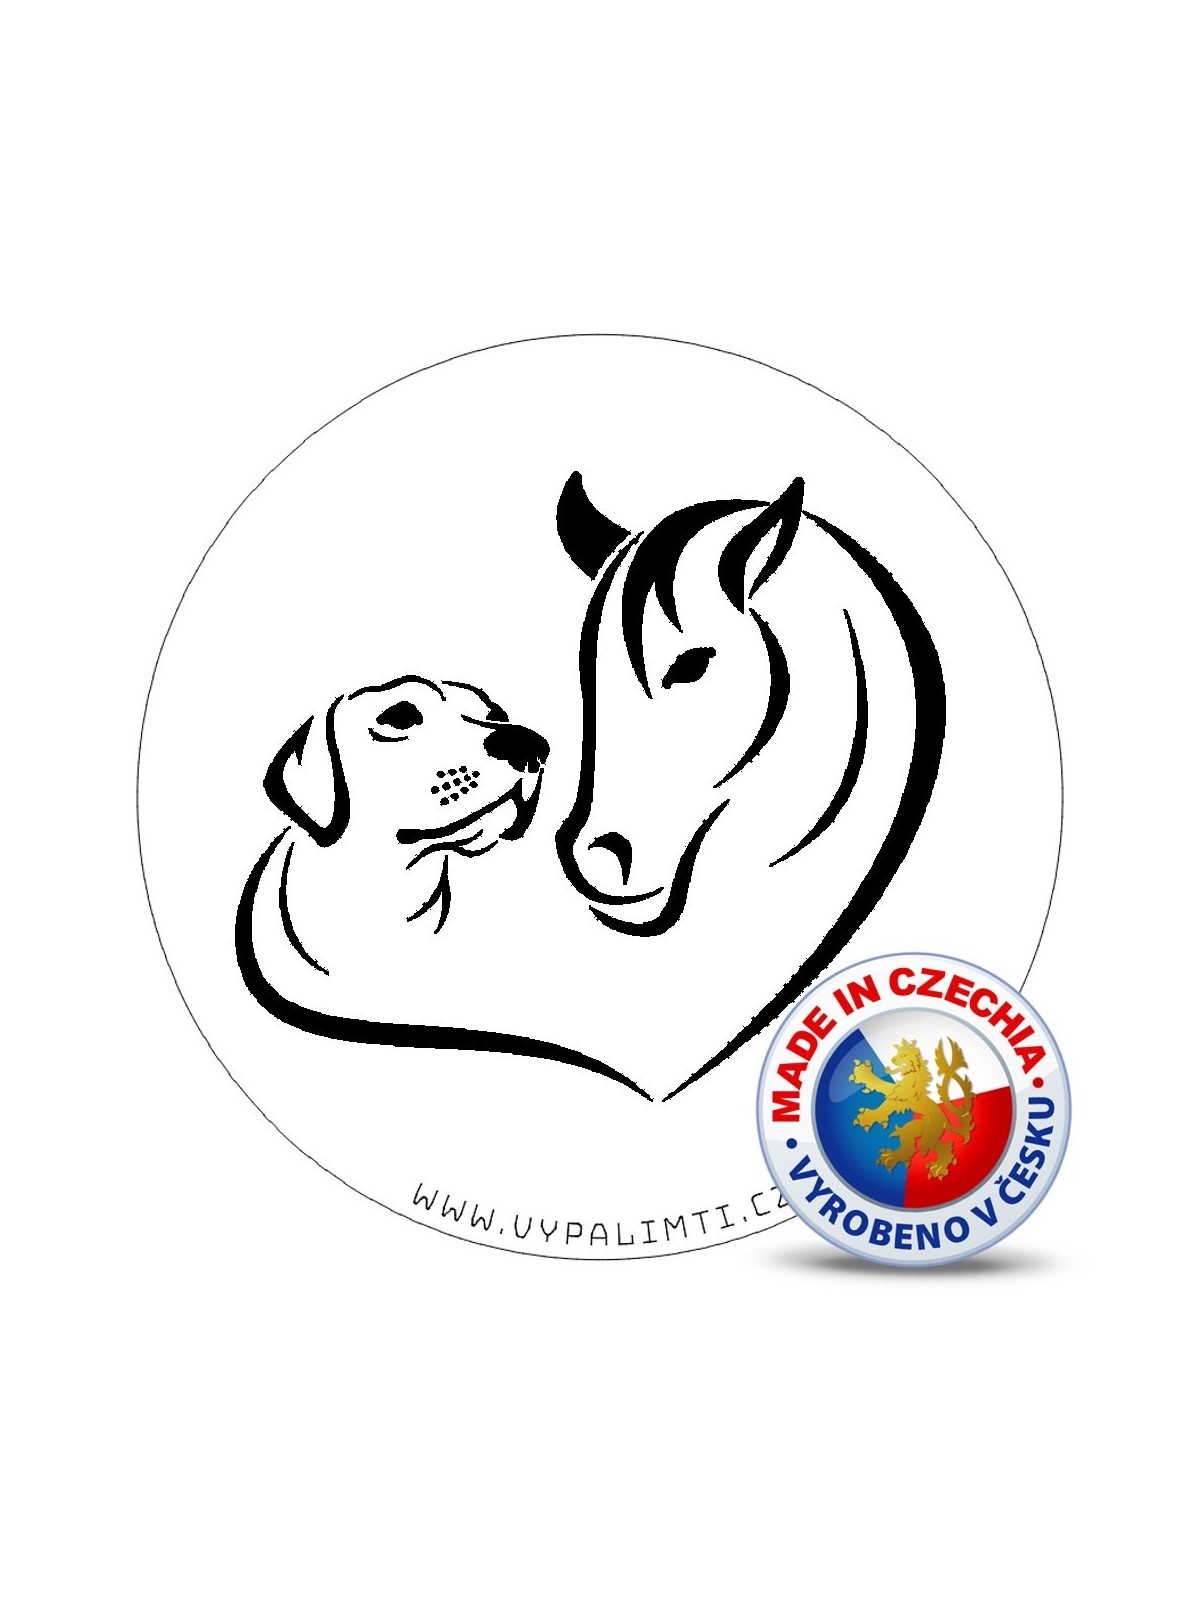 Stencil template - Heart horse and dog